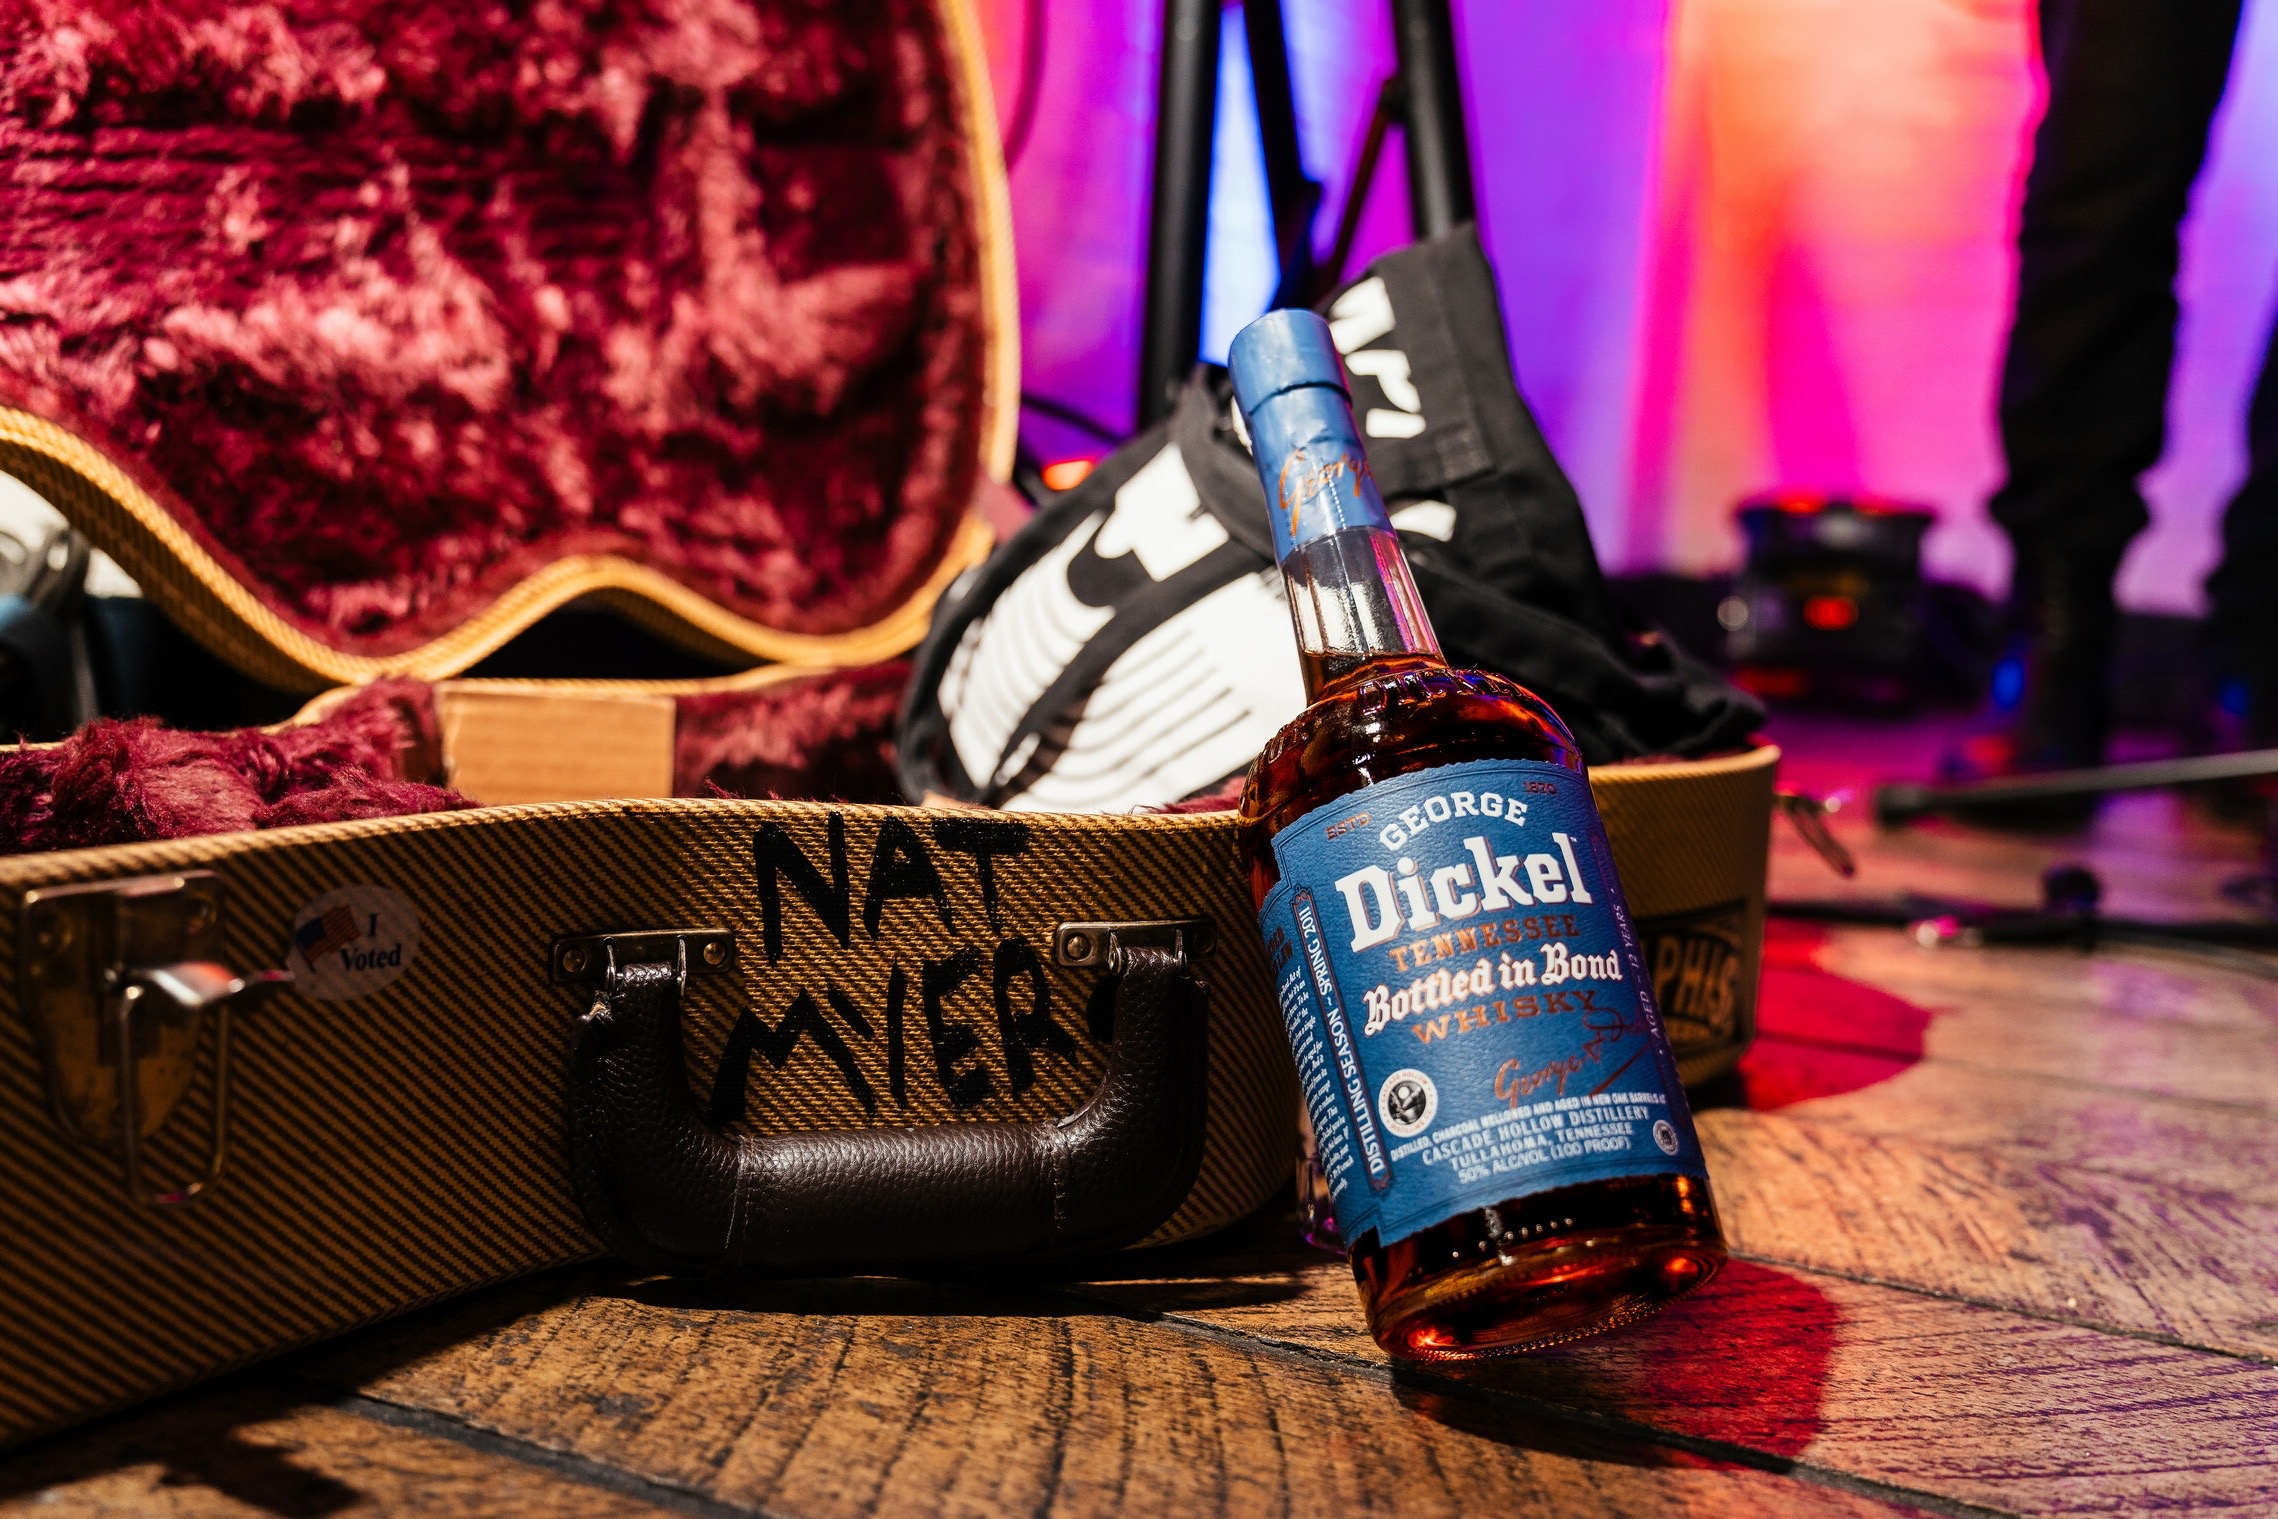 George Dickel Unveils New, 12 Year Bottled in Bond Tennessee Whisky